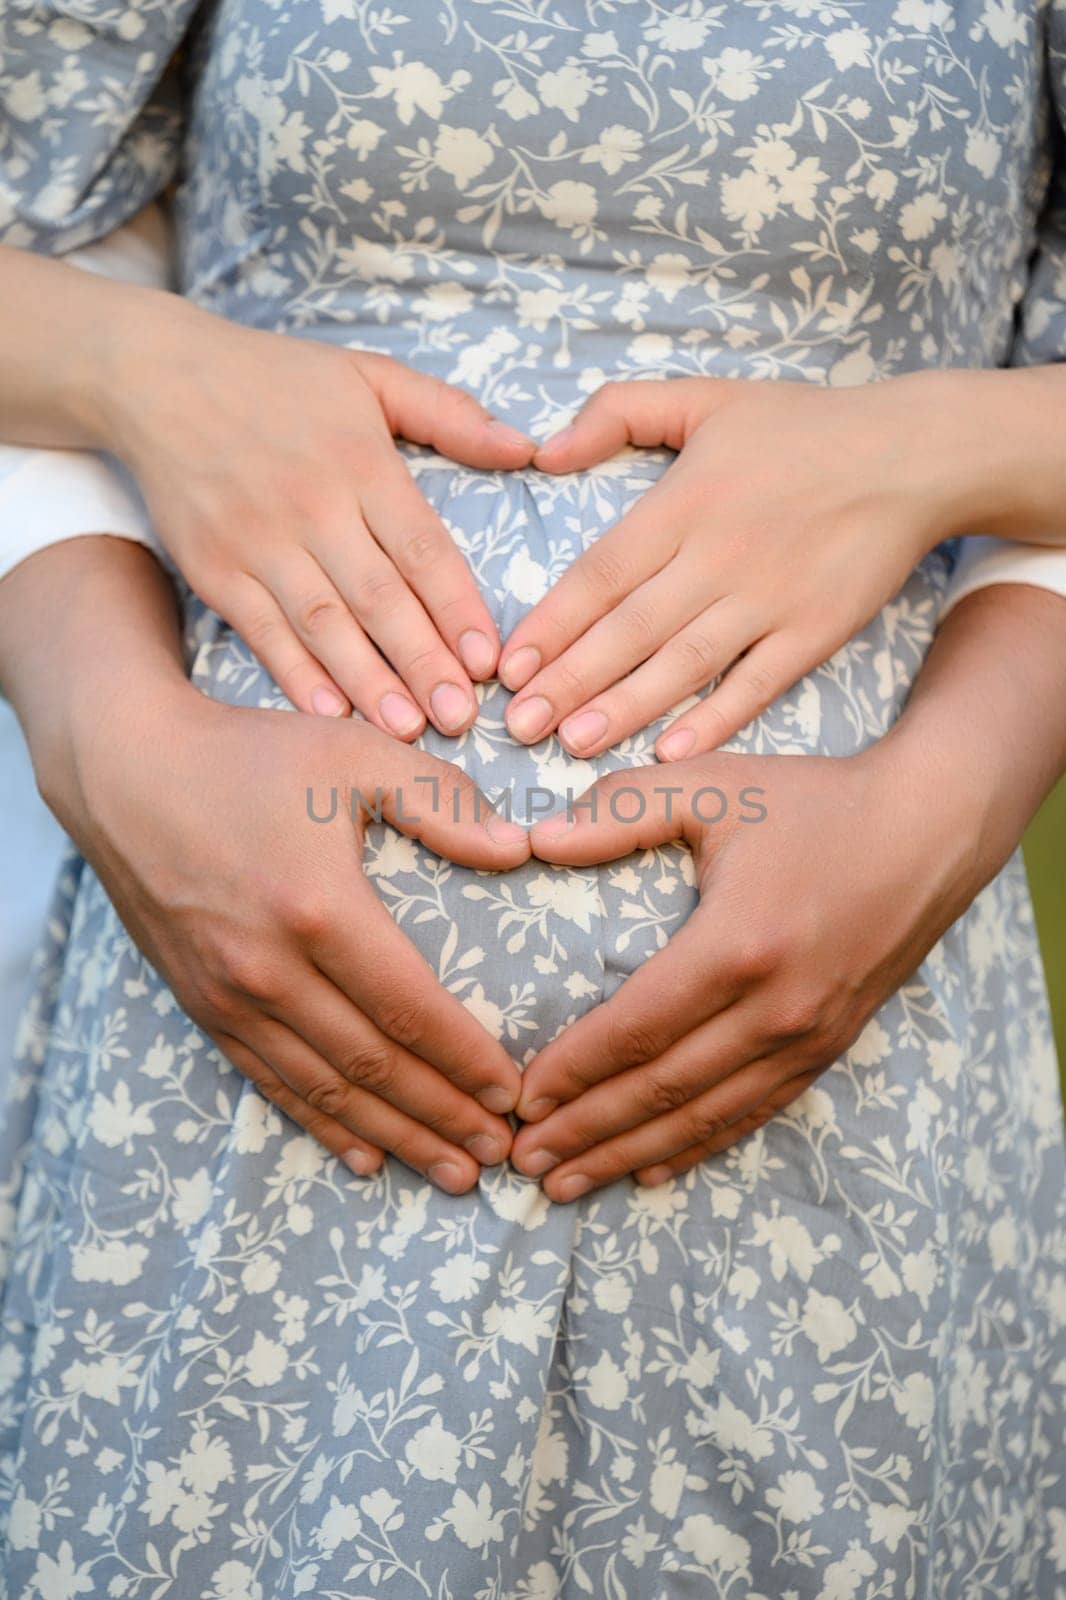 A family couple hugs a pregnant woman's belly, a man and a woman are expecting a baby, a photo session for pregnant women. The fingers are folded in the shape of a heart.